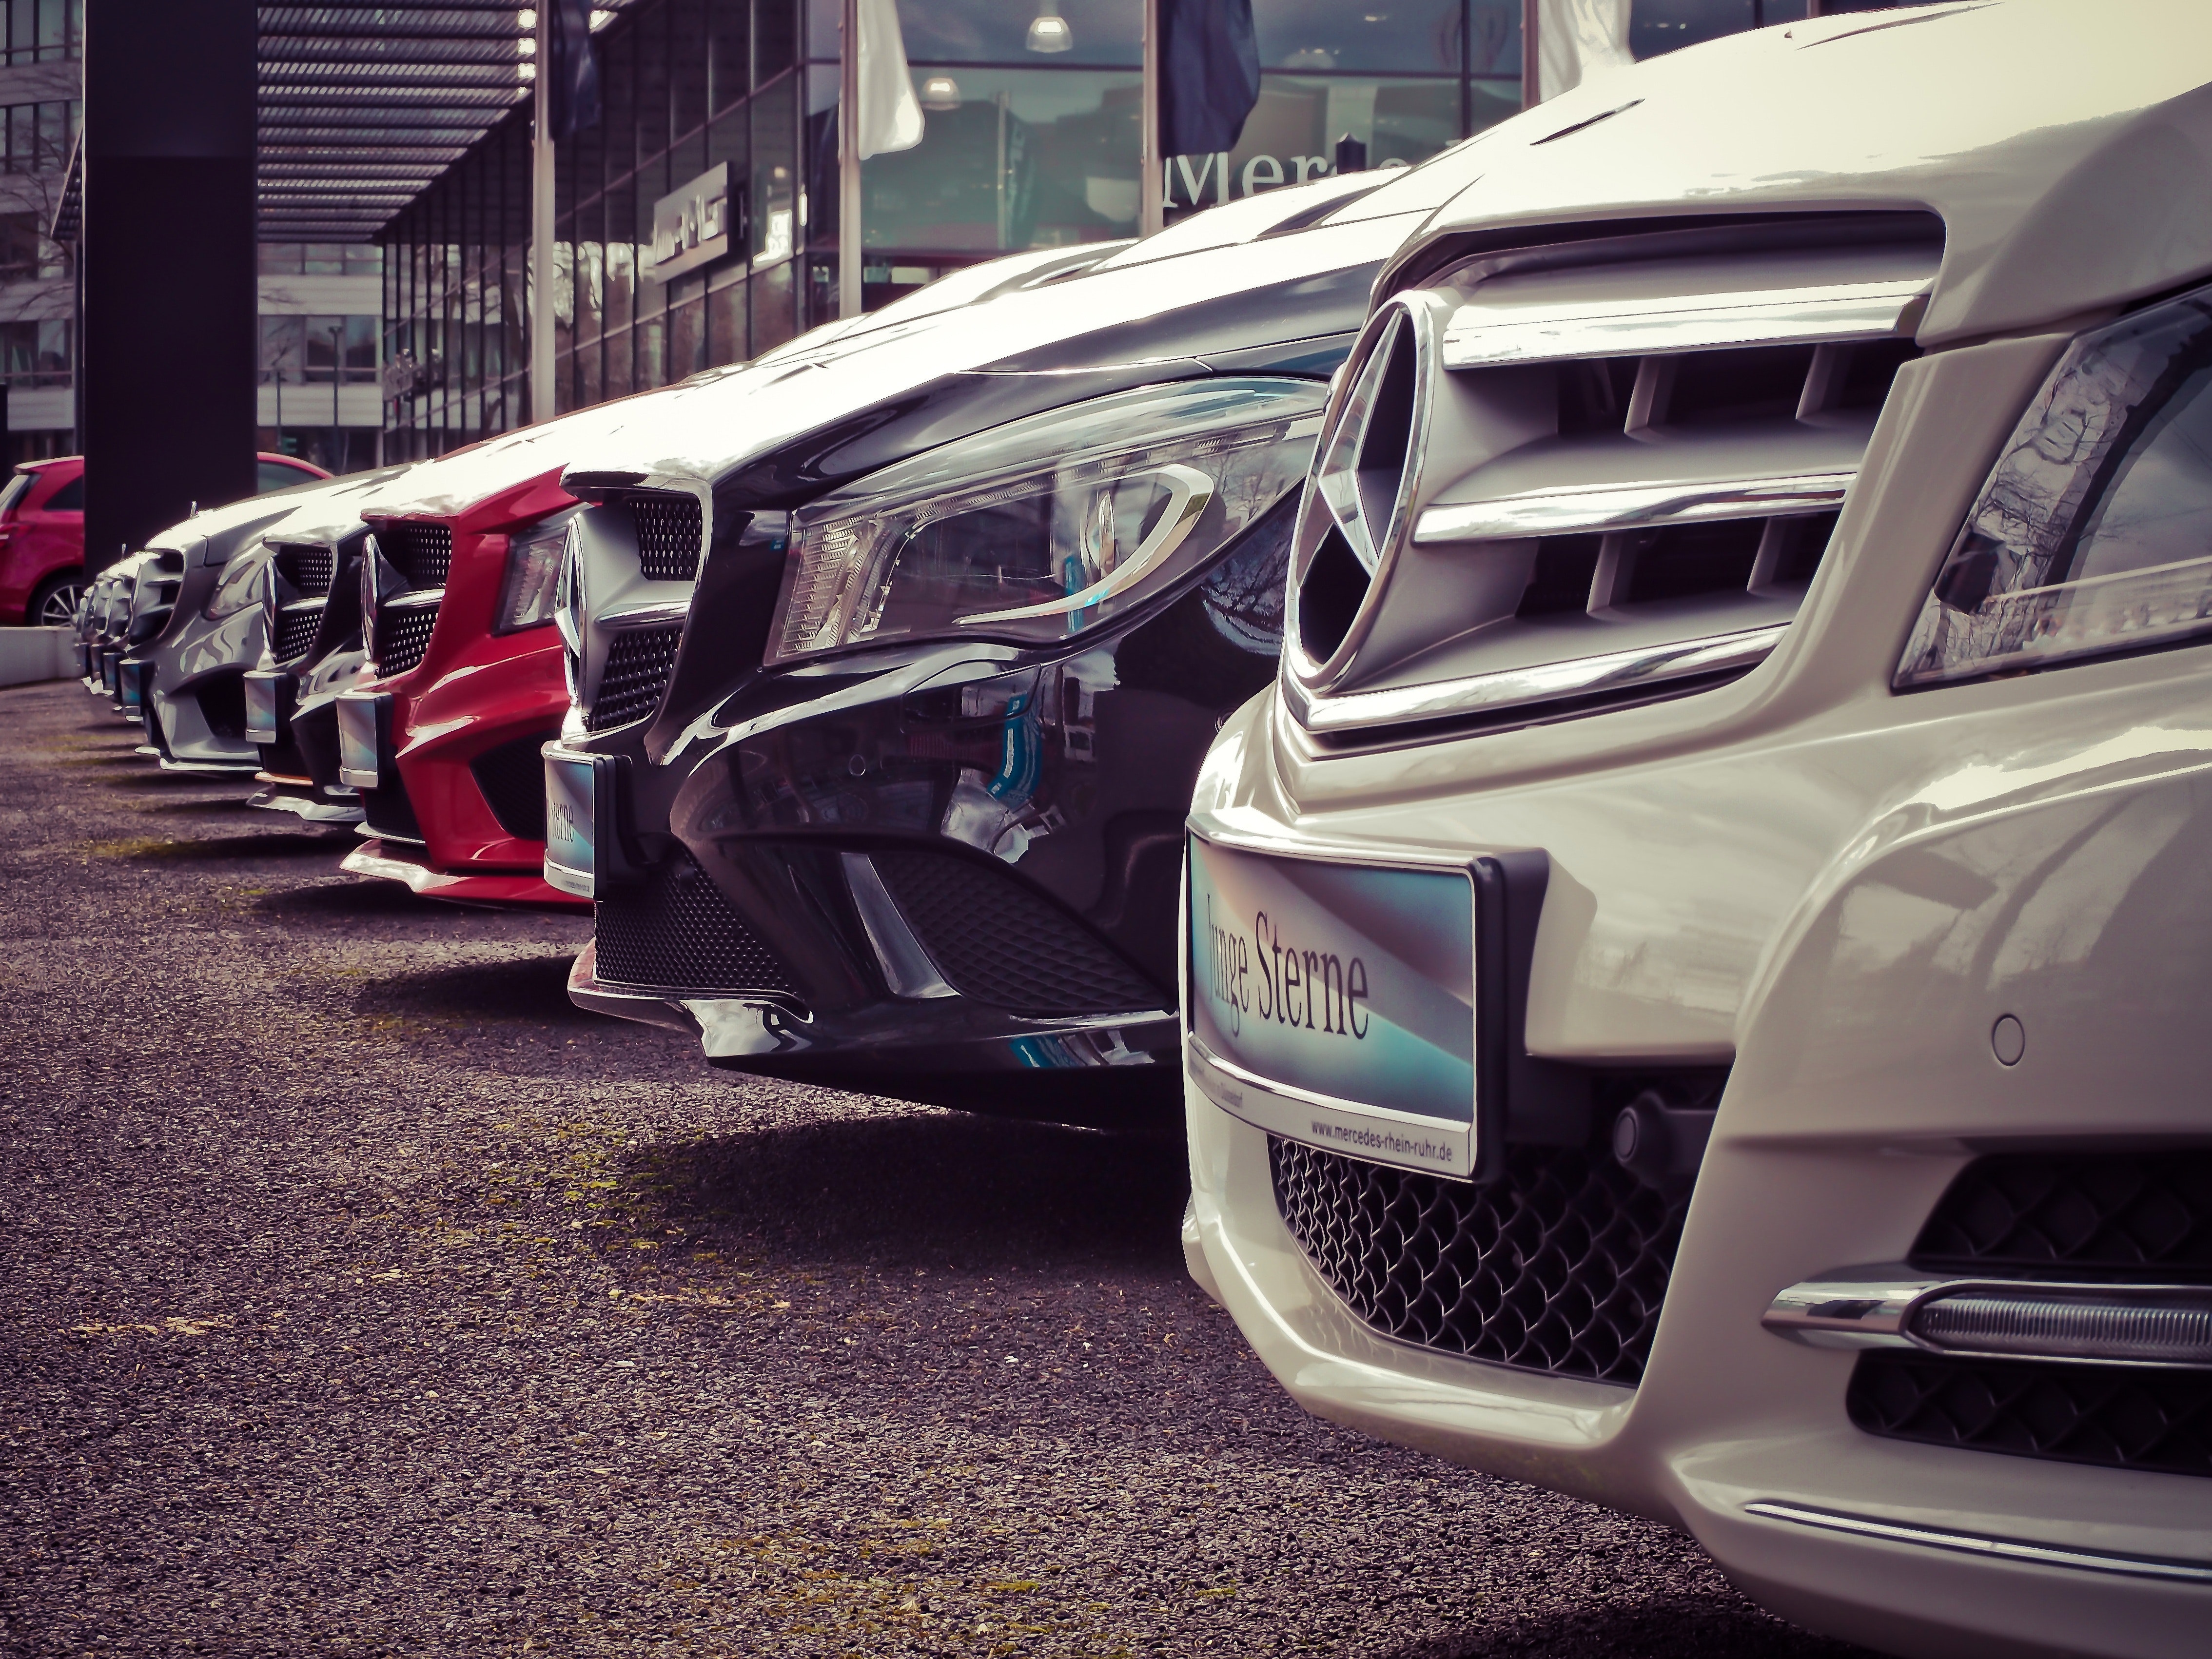 Cars parked in a row | Source: Pexels